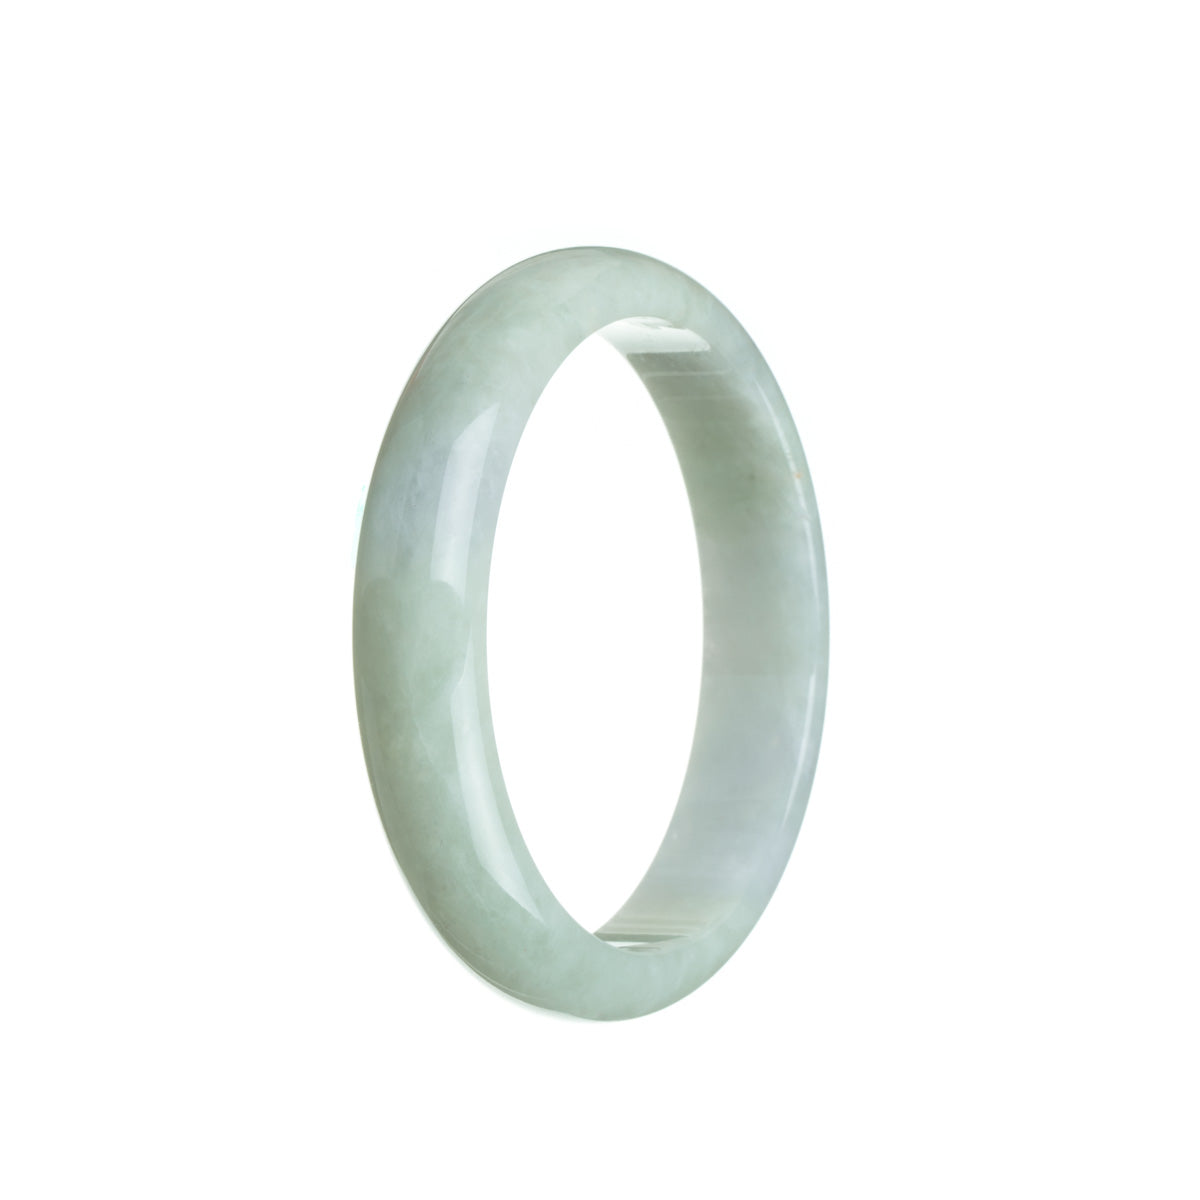 A close-up image of a pale green jadeite jade bangle bracelet in a half-moon shape, showcasing its natural beauty and authenticity.